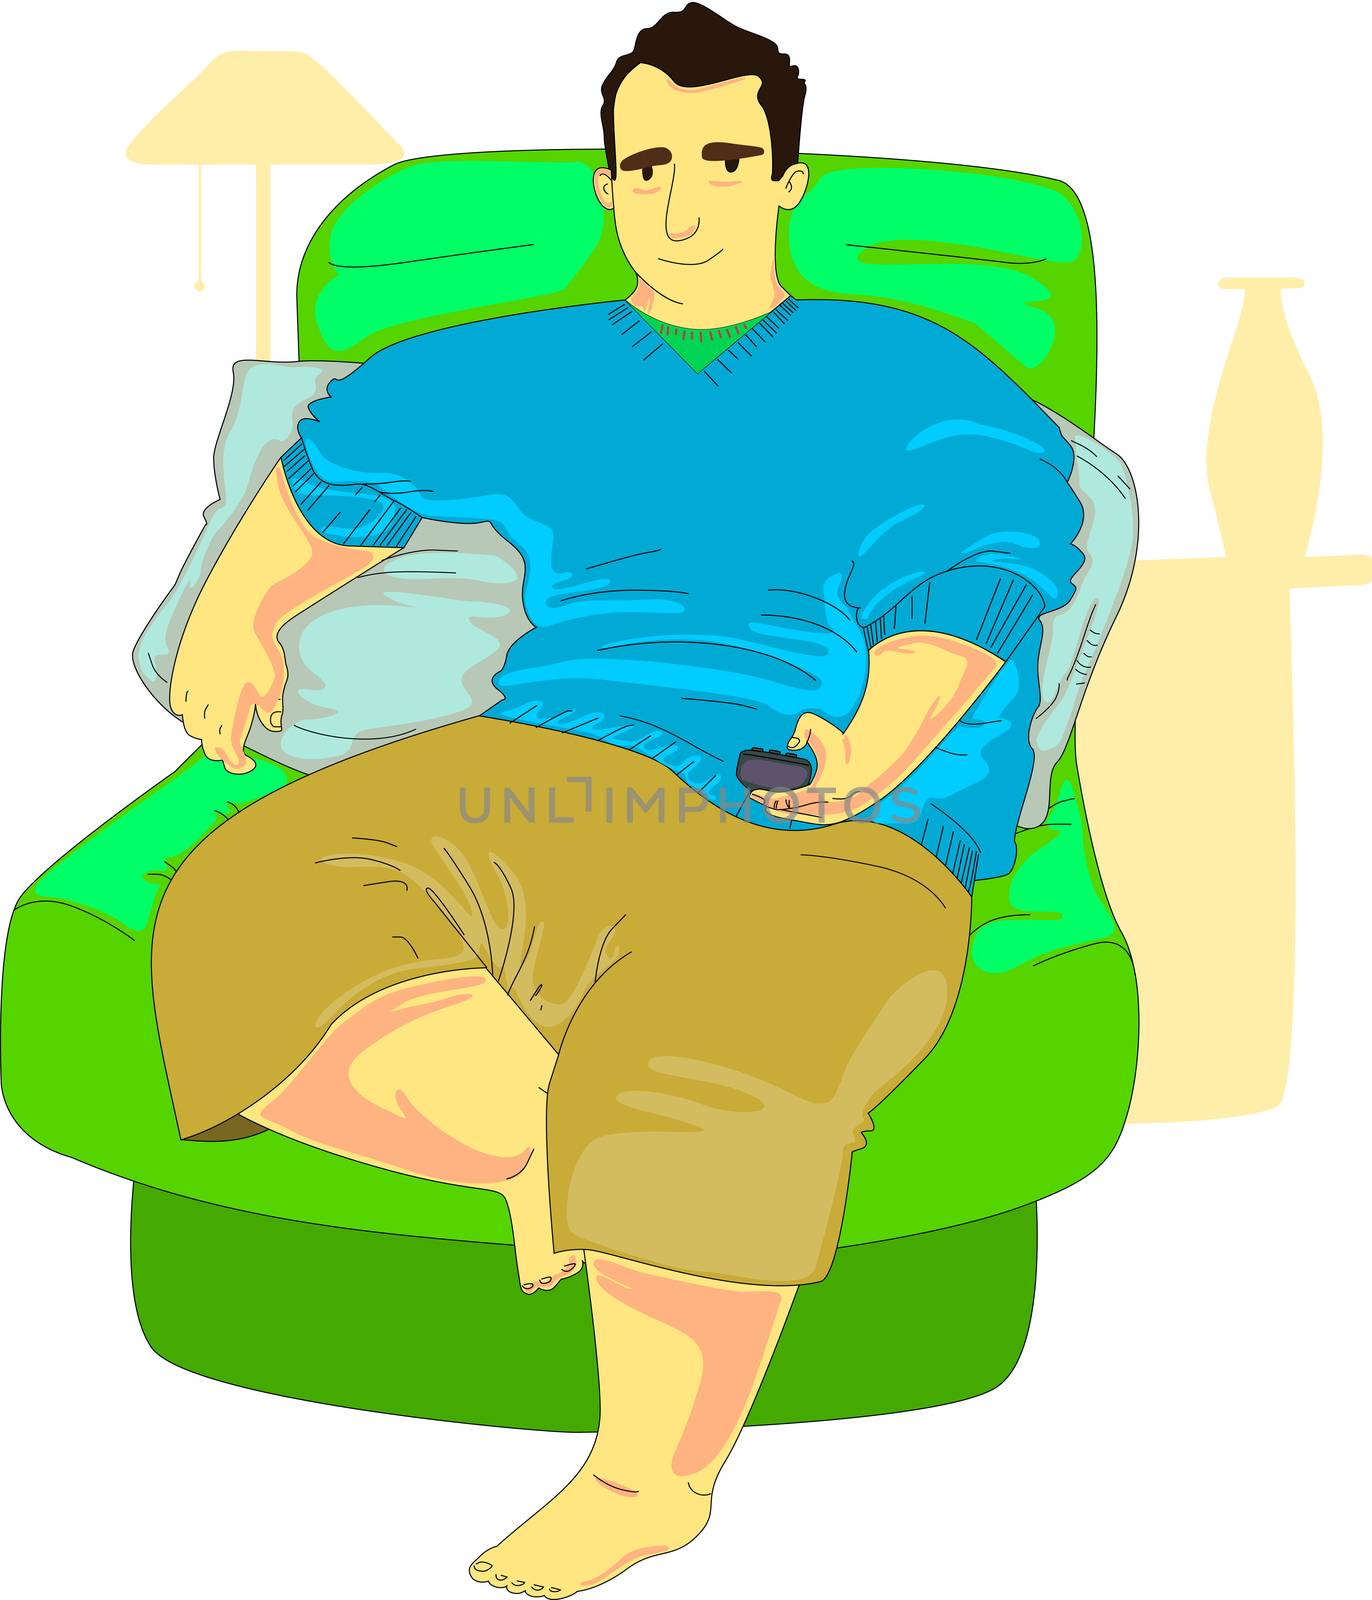 Chubby guy sitting on a stuffed armchair browsing TV in his living room.